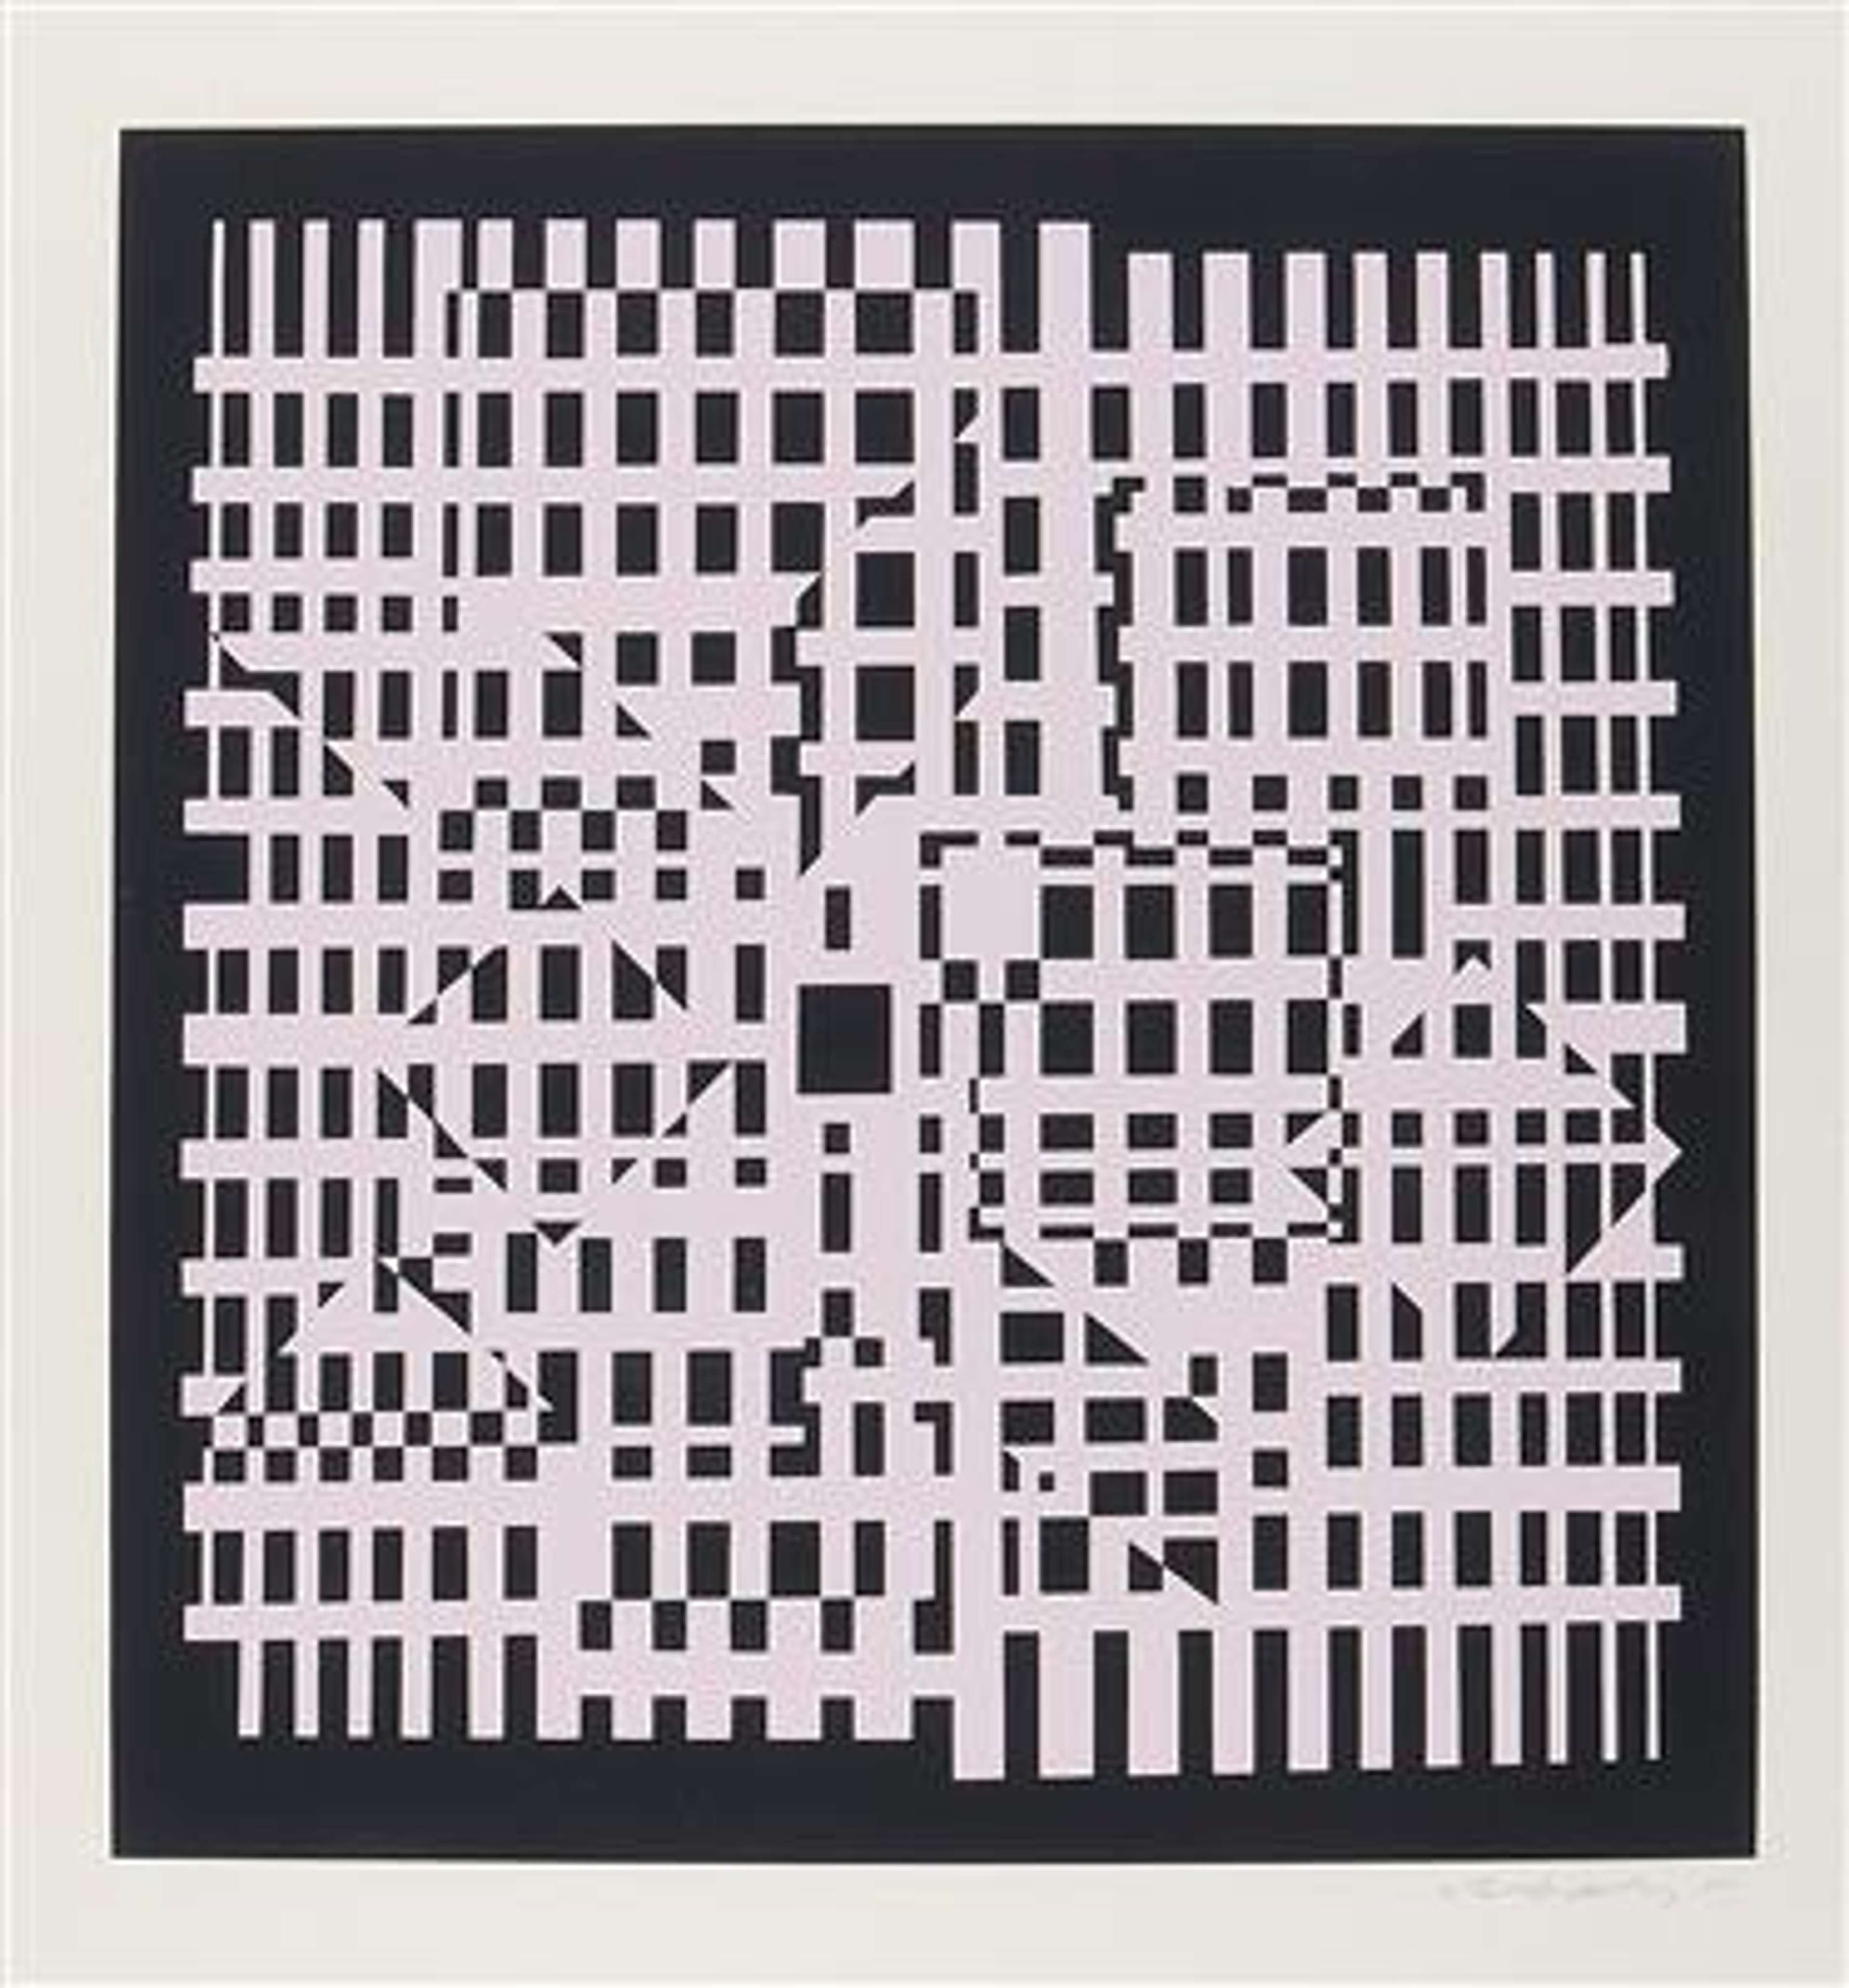 Caracas by Victor Vasarely (1955). The print is a black and white, irregular grid, which produces the optical illusion of shapes hidden within it.